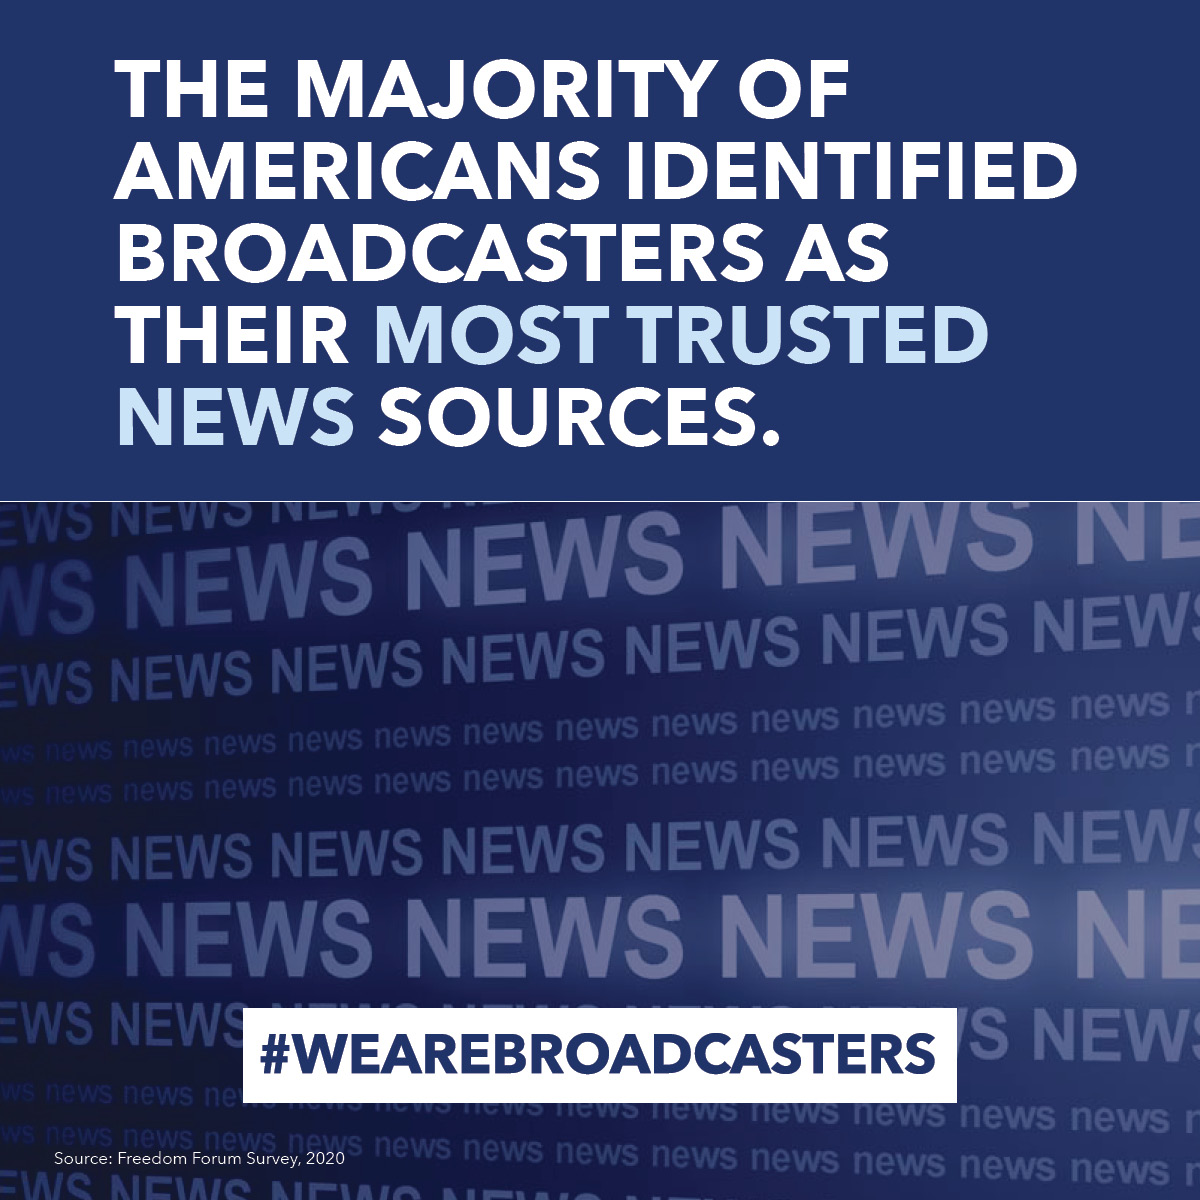 The majority of Americans identified broadcasters as their most trusted news sources